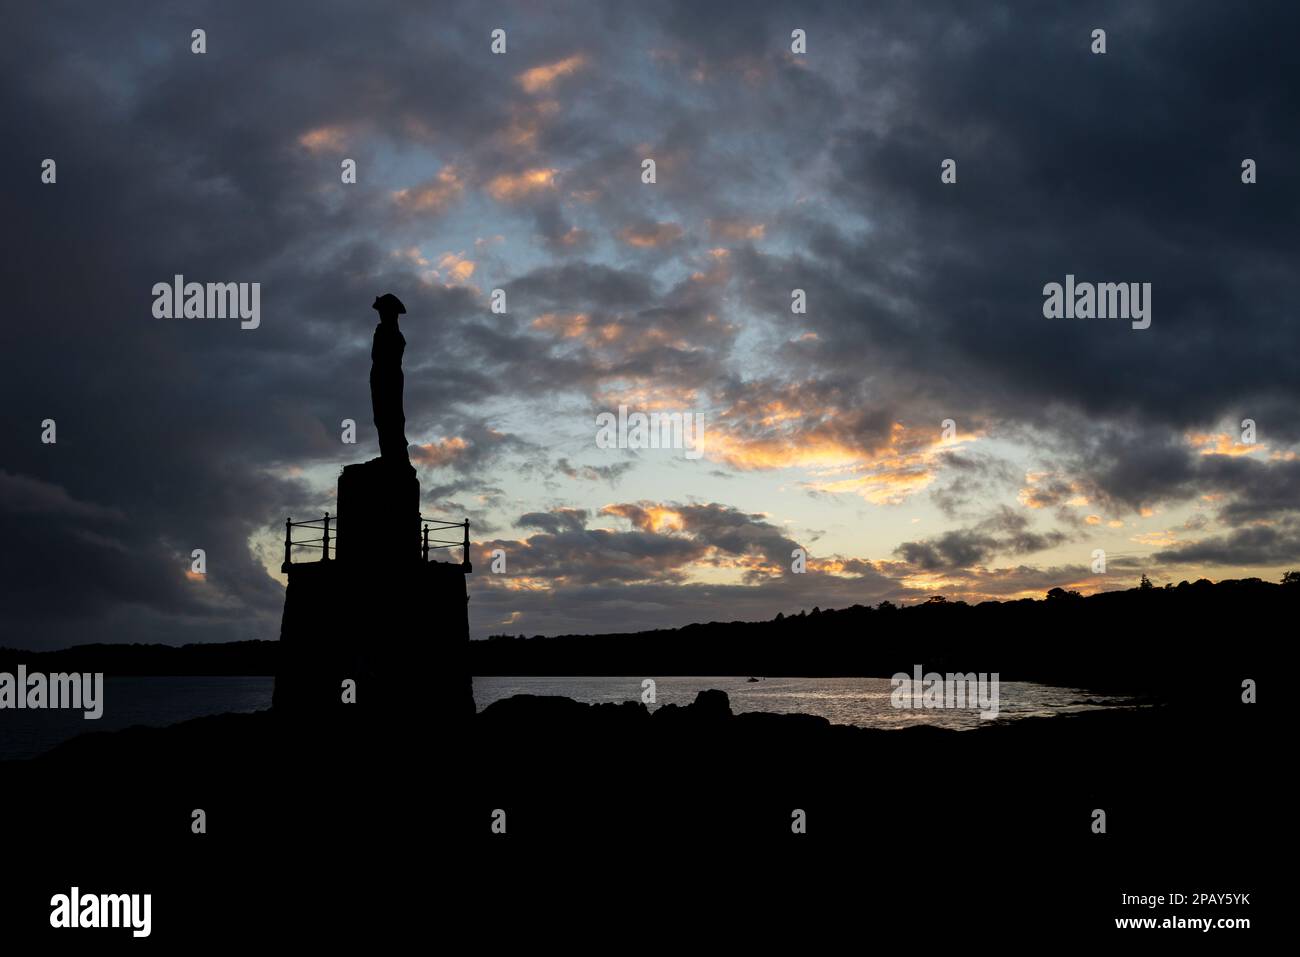 Lord Nelson's Statue near Plas Llanfair overlooking the Menai Strait, Anglesey, North Wales. Stock Photo